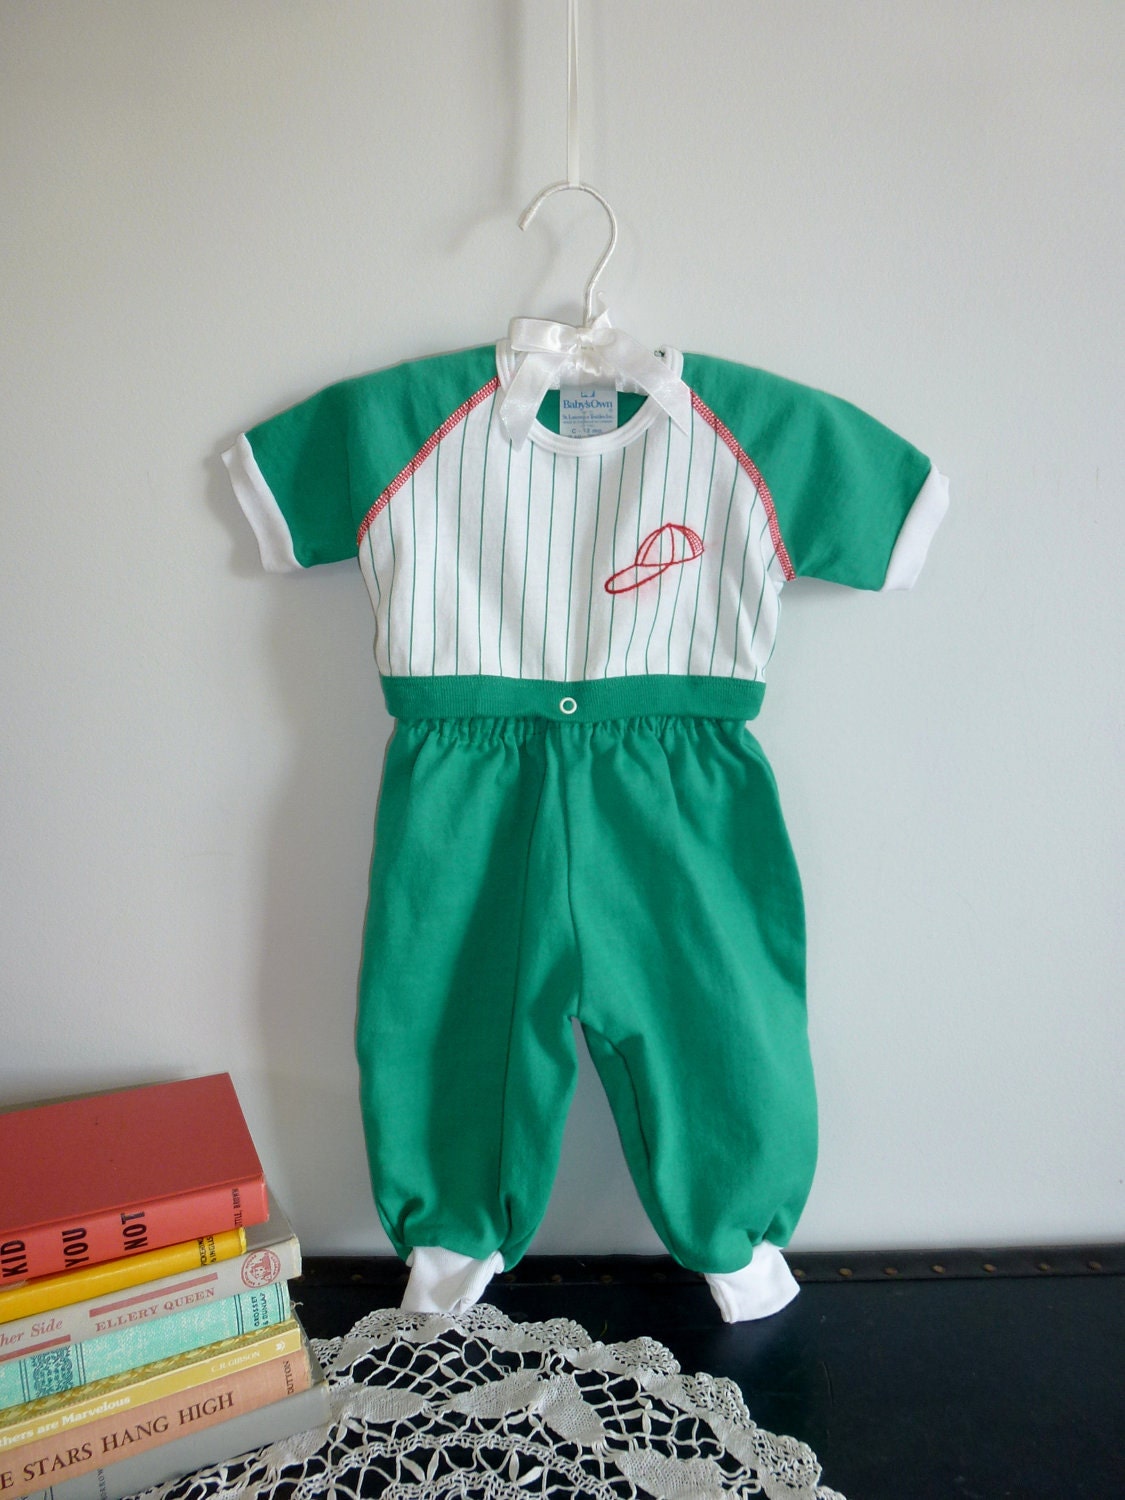 Baseball Outfit - Apearsvintagegoodies